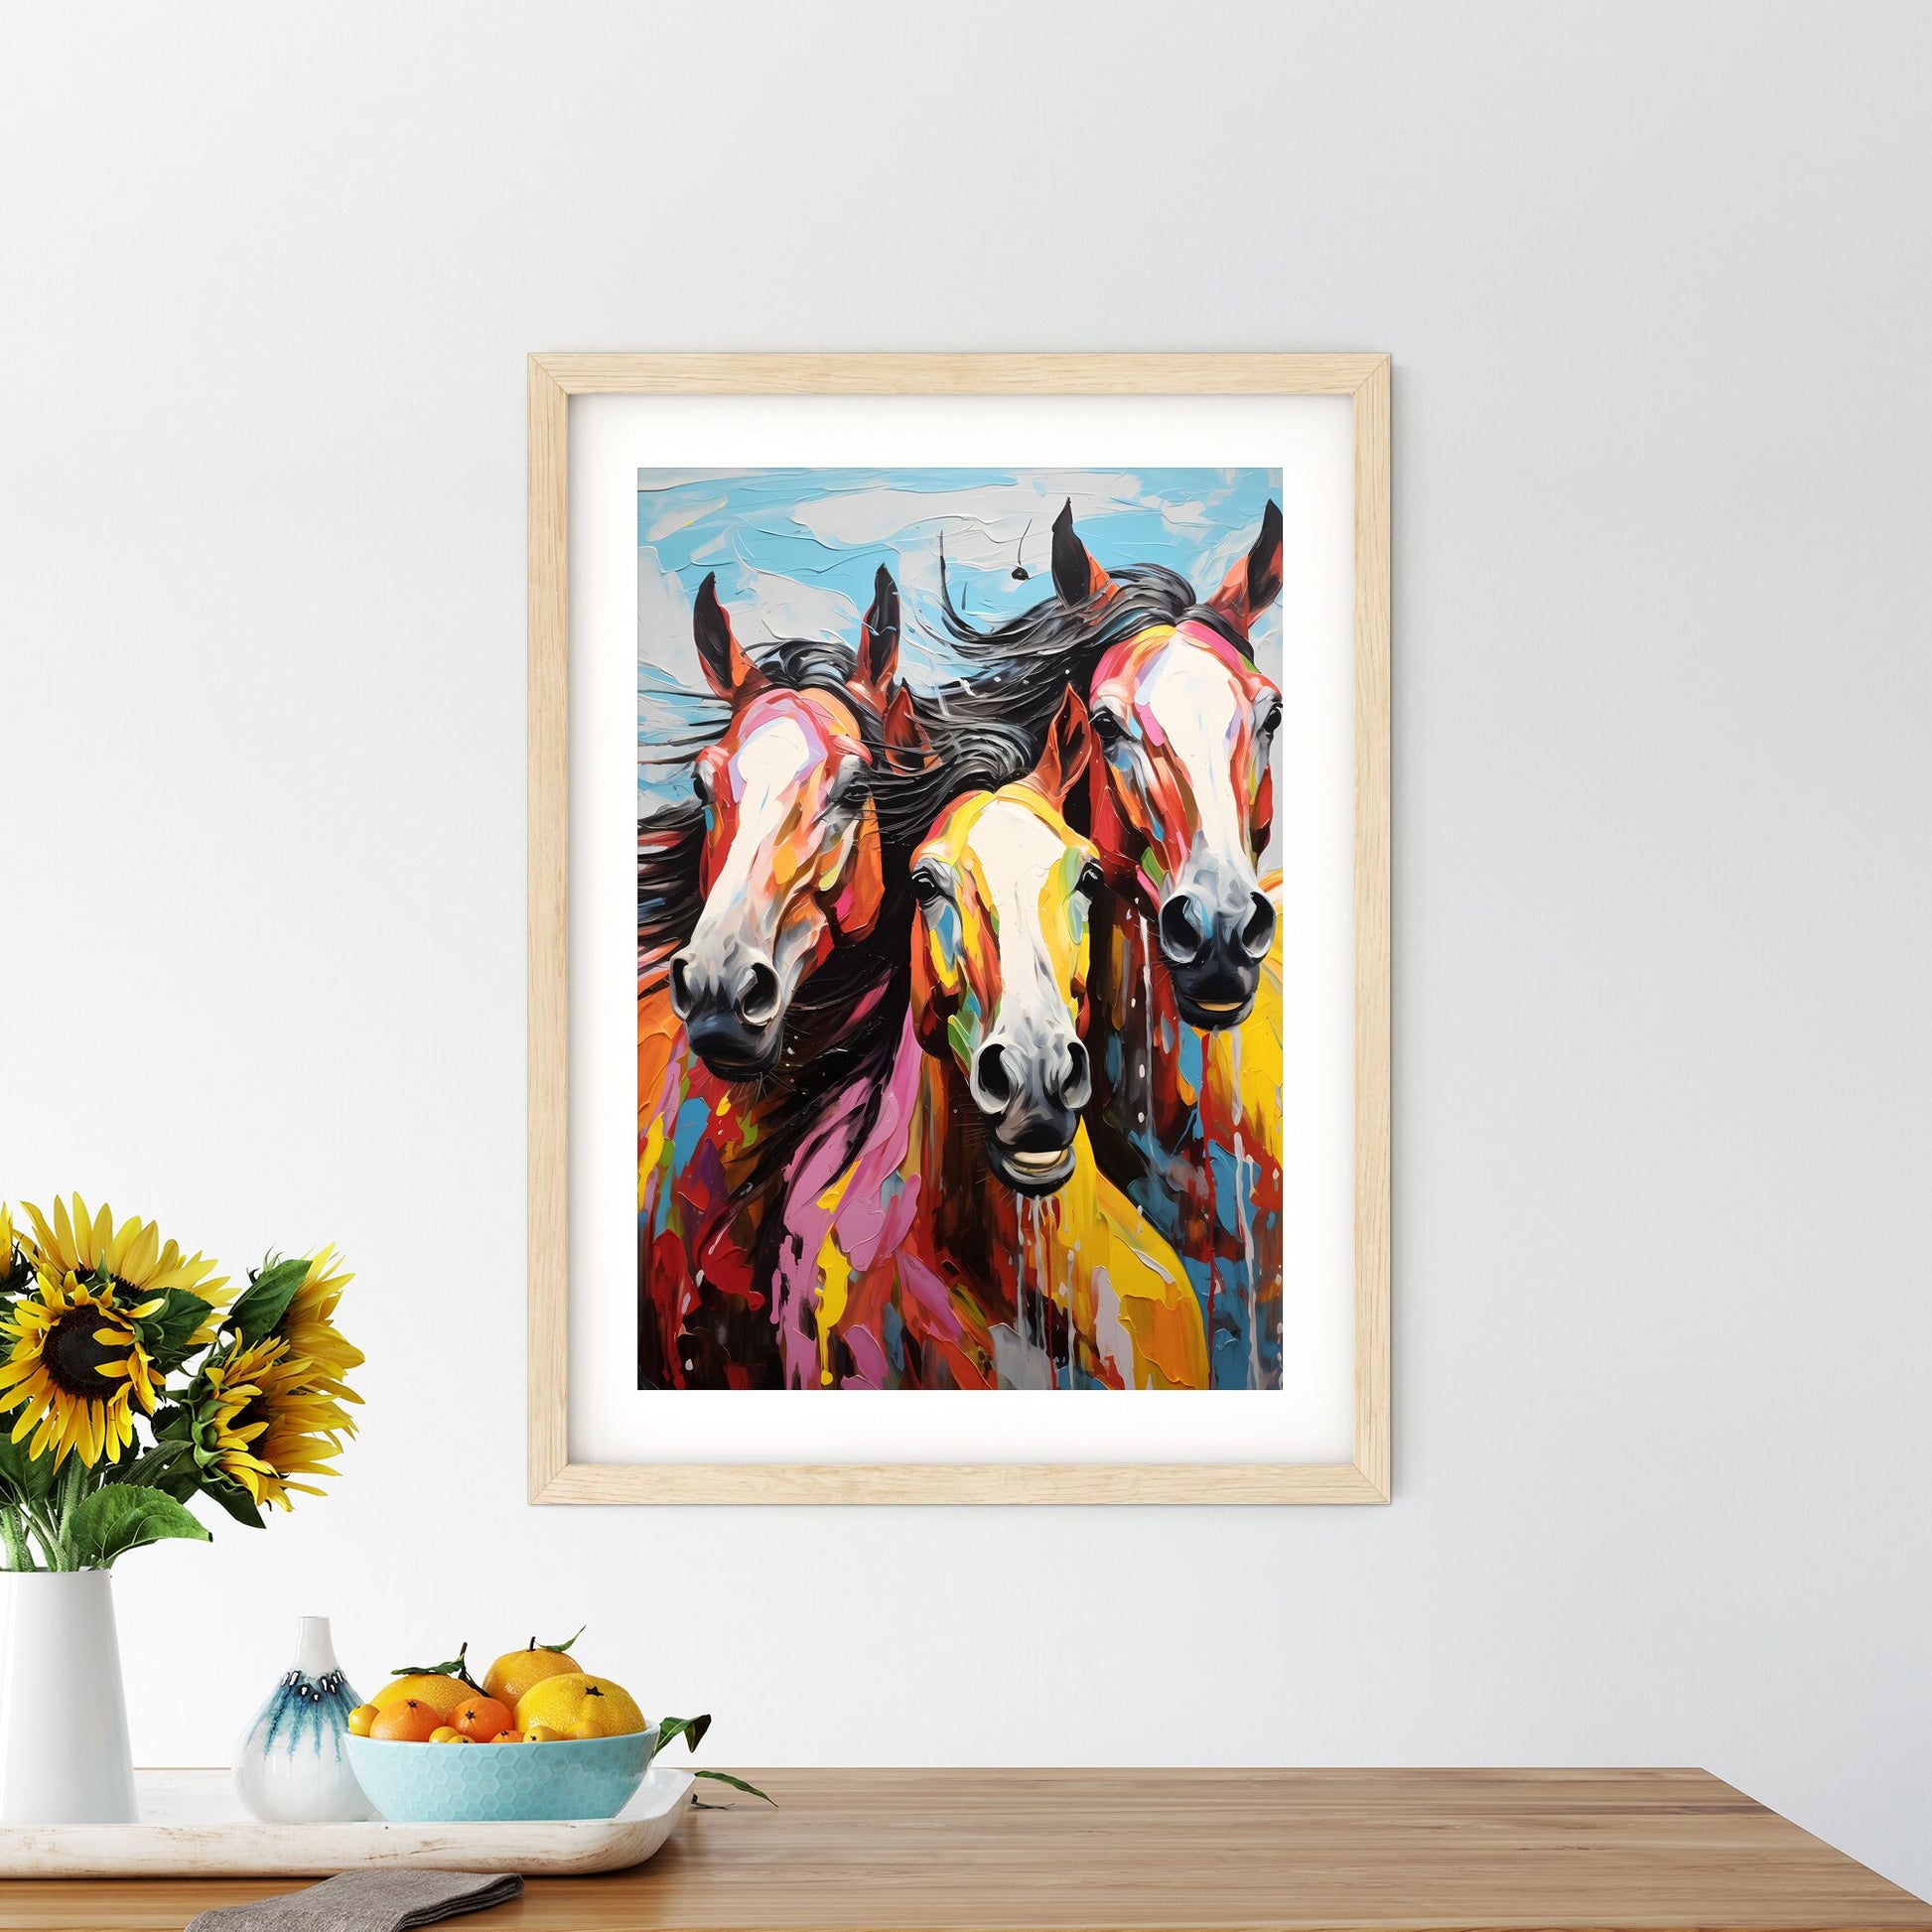 Painting Of Horses With Colorful Paint Splashes Art Print Default Title